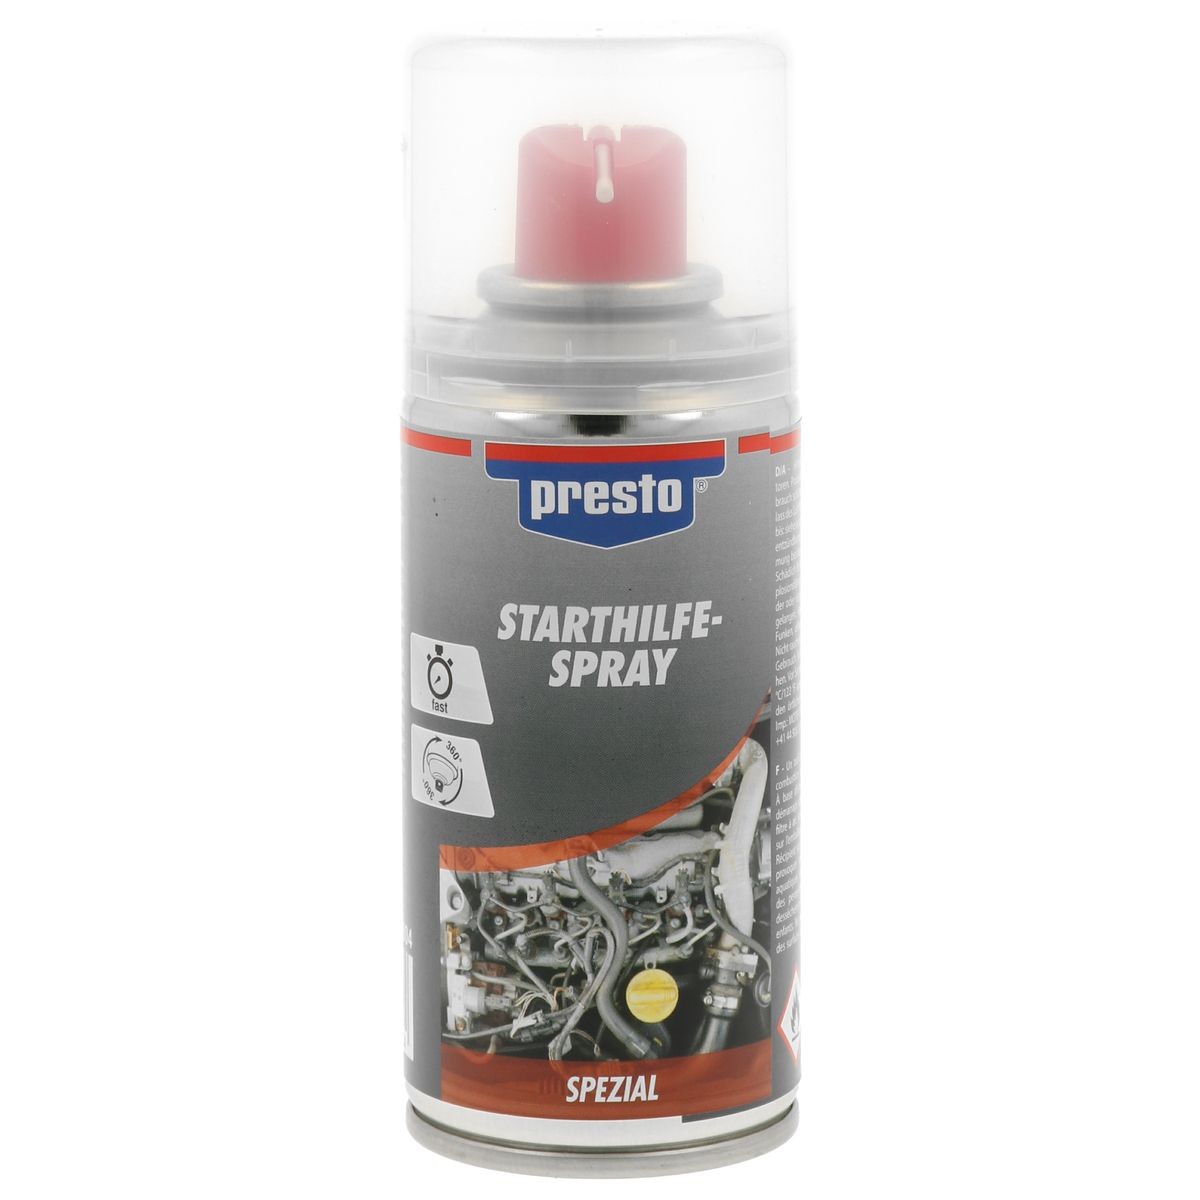 Starter Spray for your car ▷ at low prices